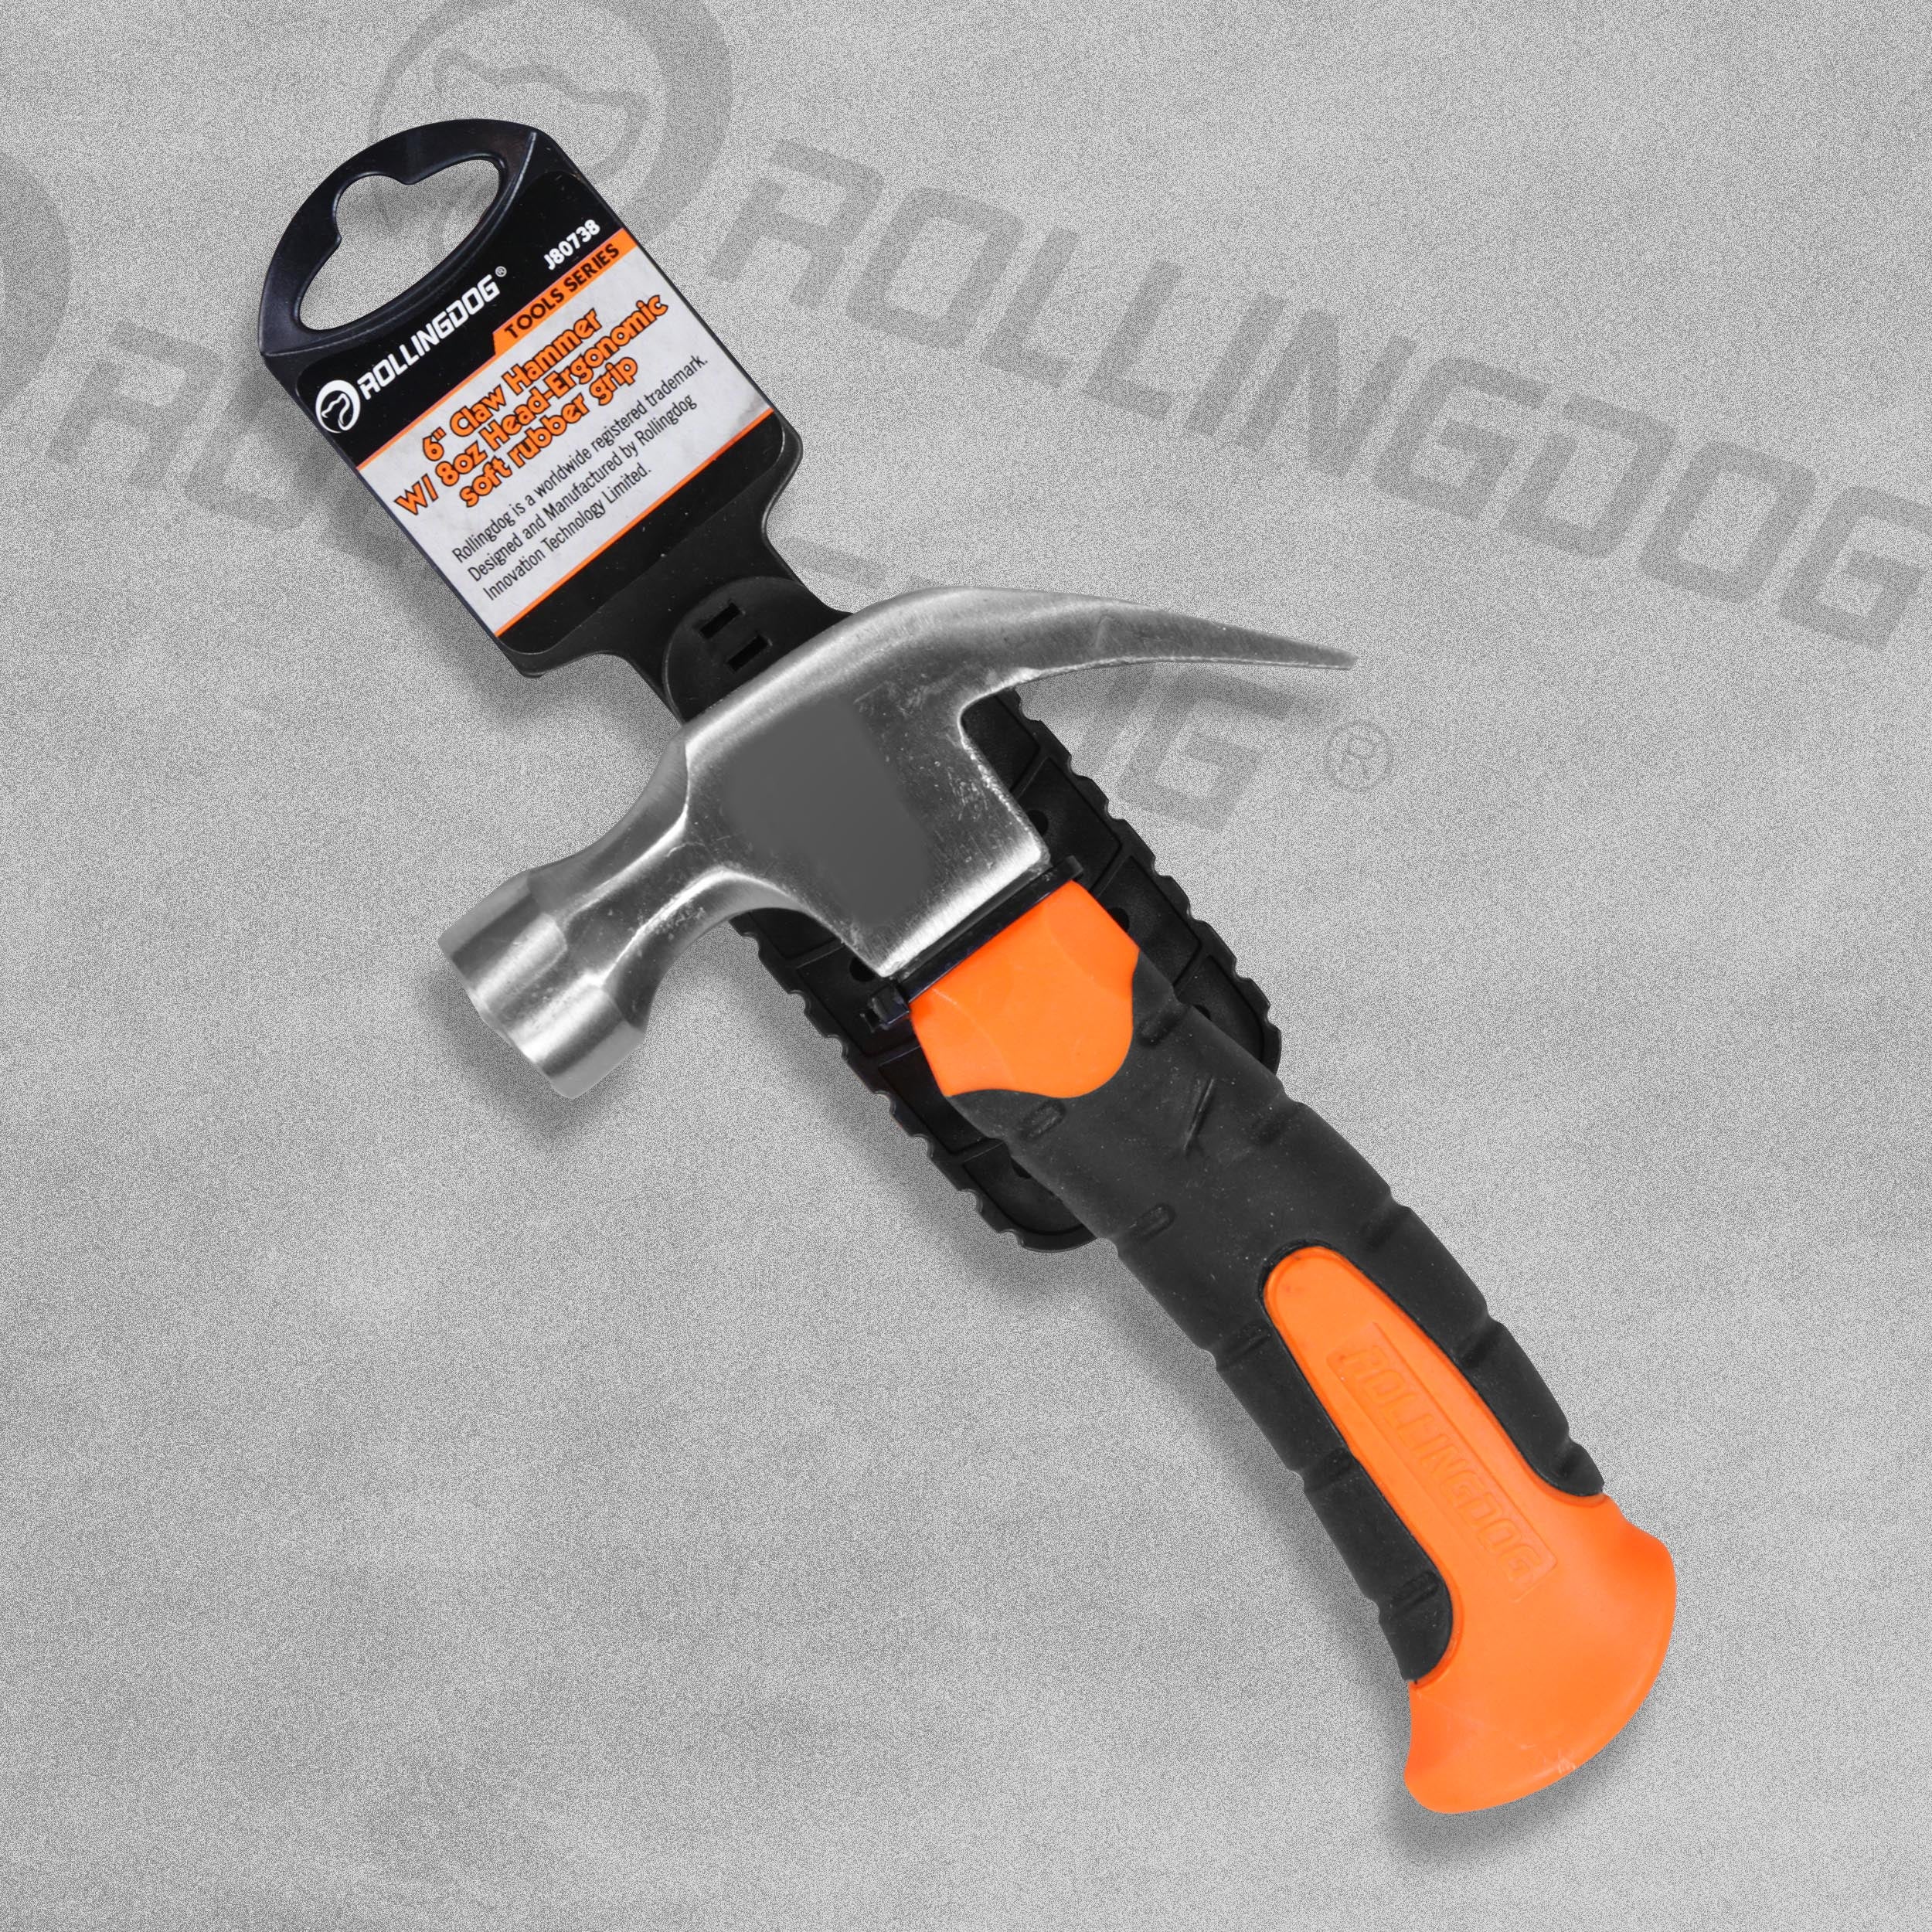 8oz Carbon Steel Stubby Claw Hammer by Rollingdog, sold by In-Excess